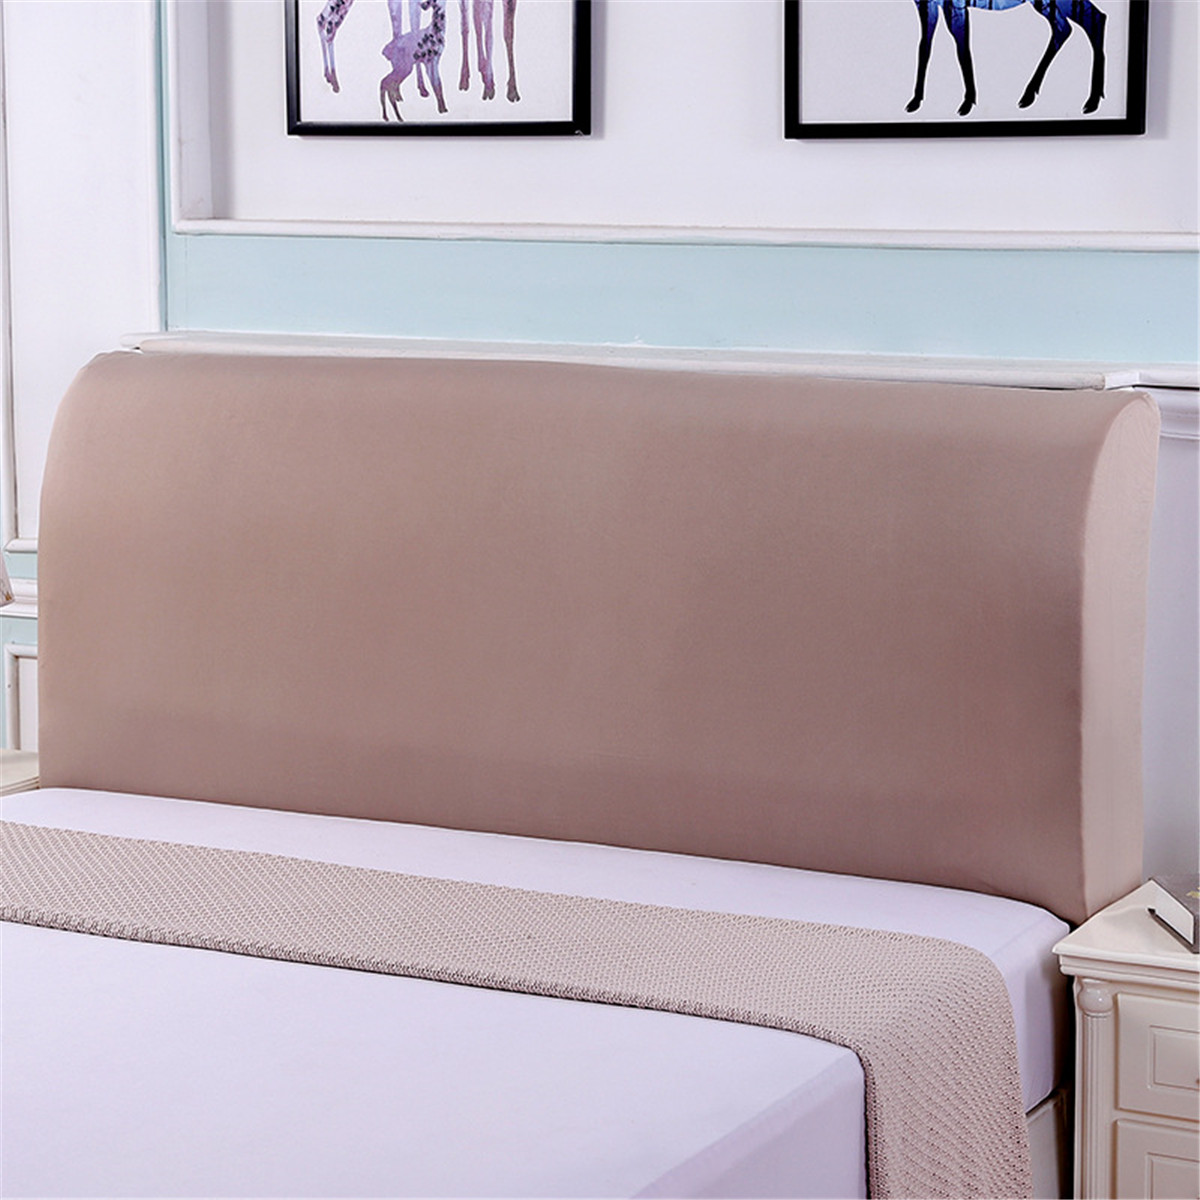 200CM-Polyester-Elastic-Bed-Headboard-Cover-Full-Dustproof-Protector-Slipcover-Bed-Protection-Dust-C-1698681-7